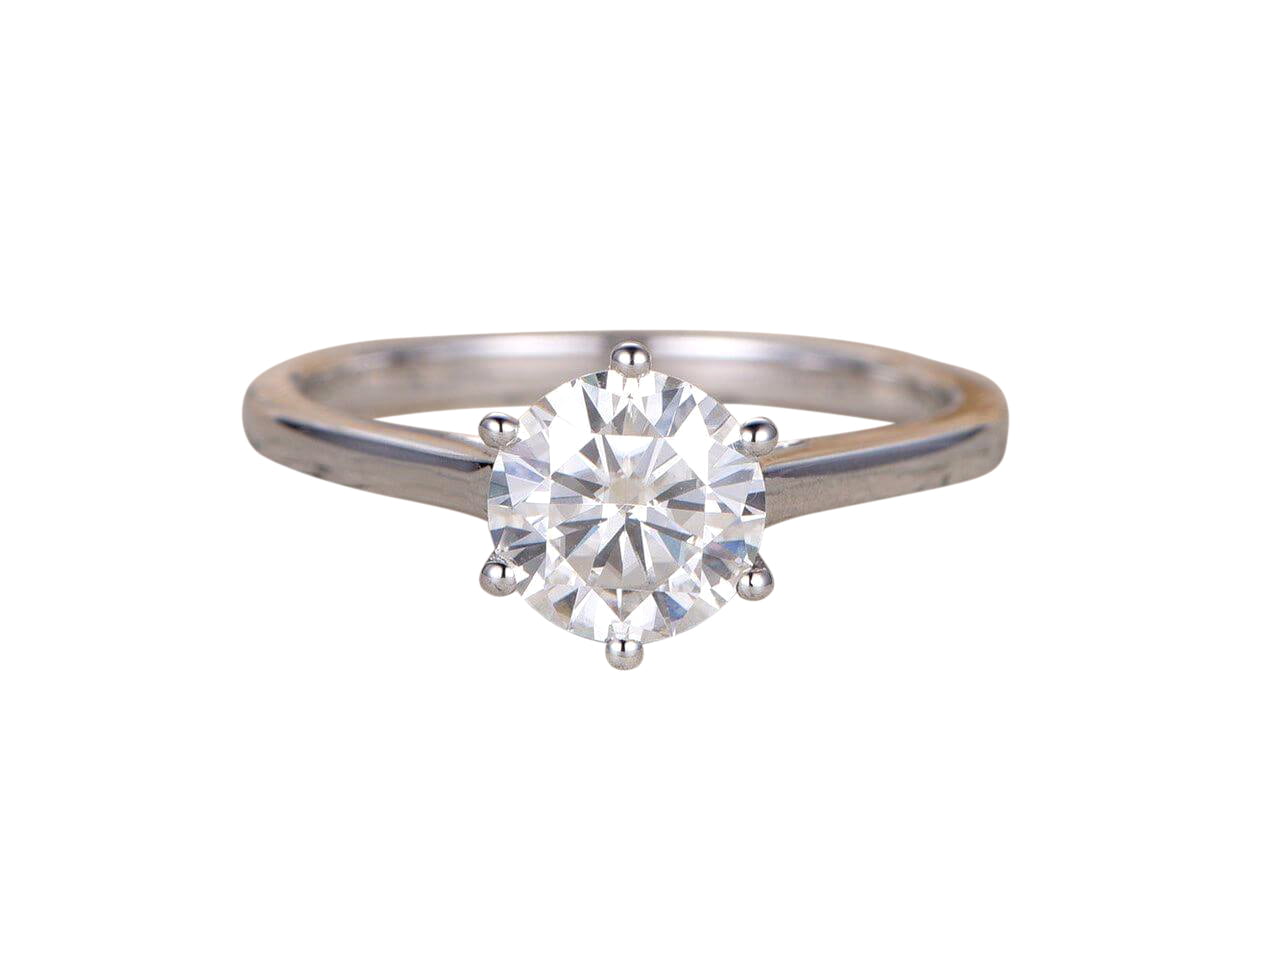 Details about   1.50 Ct Round Cut Art Deco Moissanite Vintage Engagement Ring 925 Silver Ring 